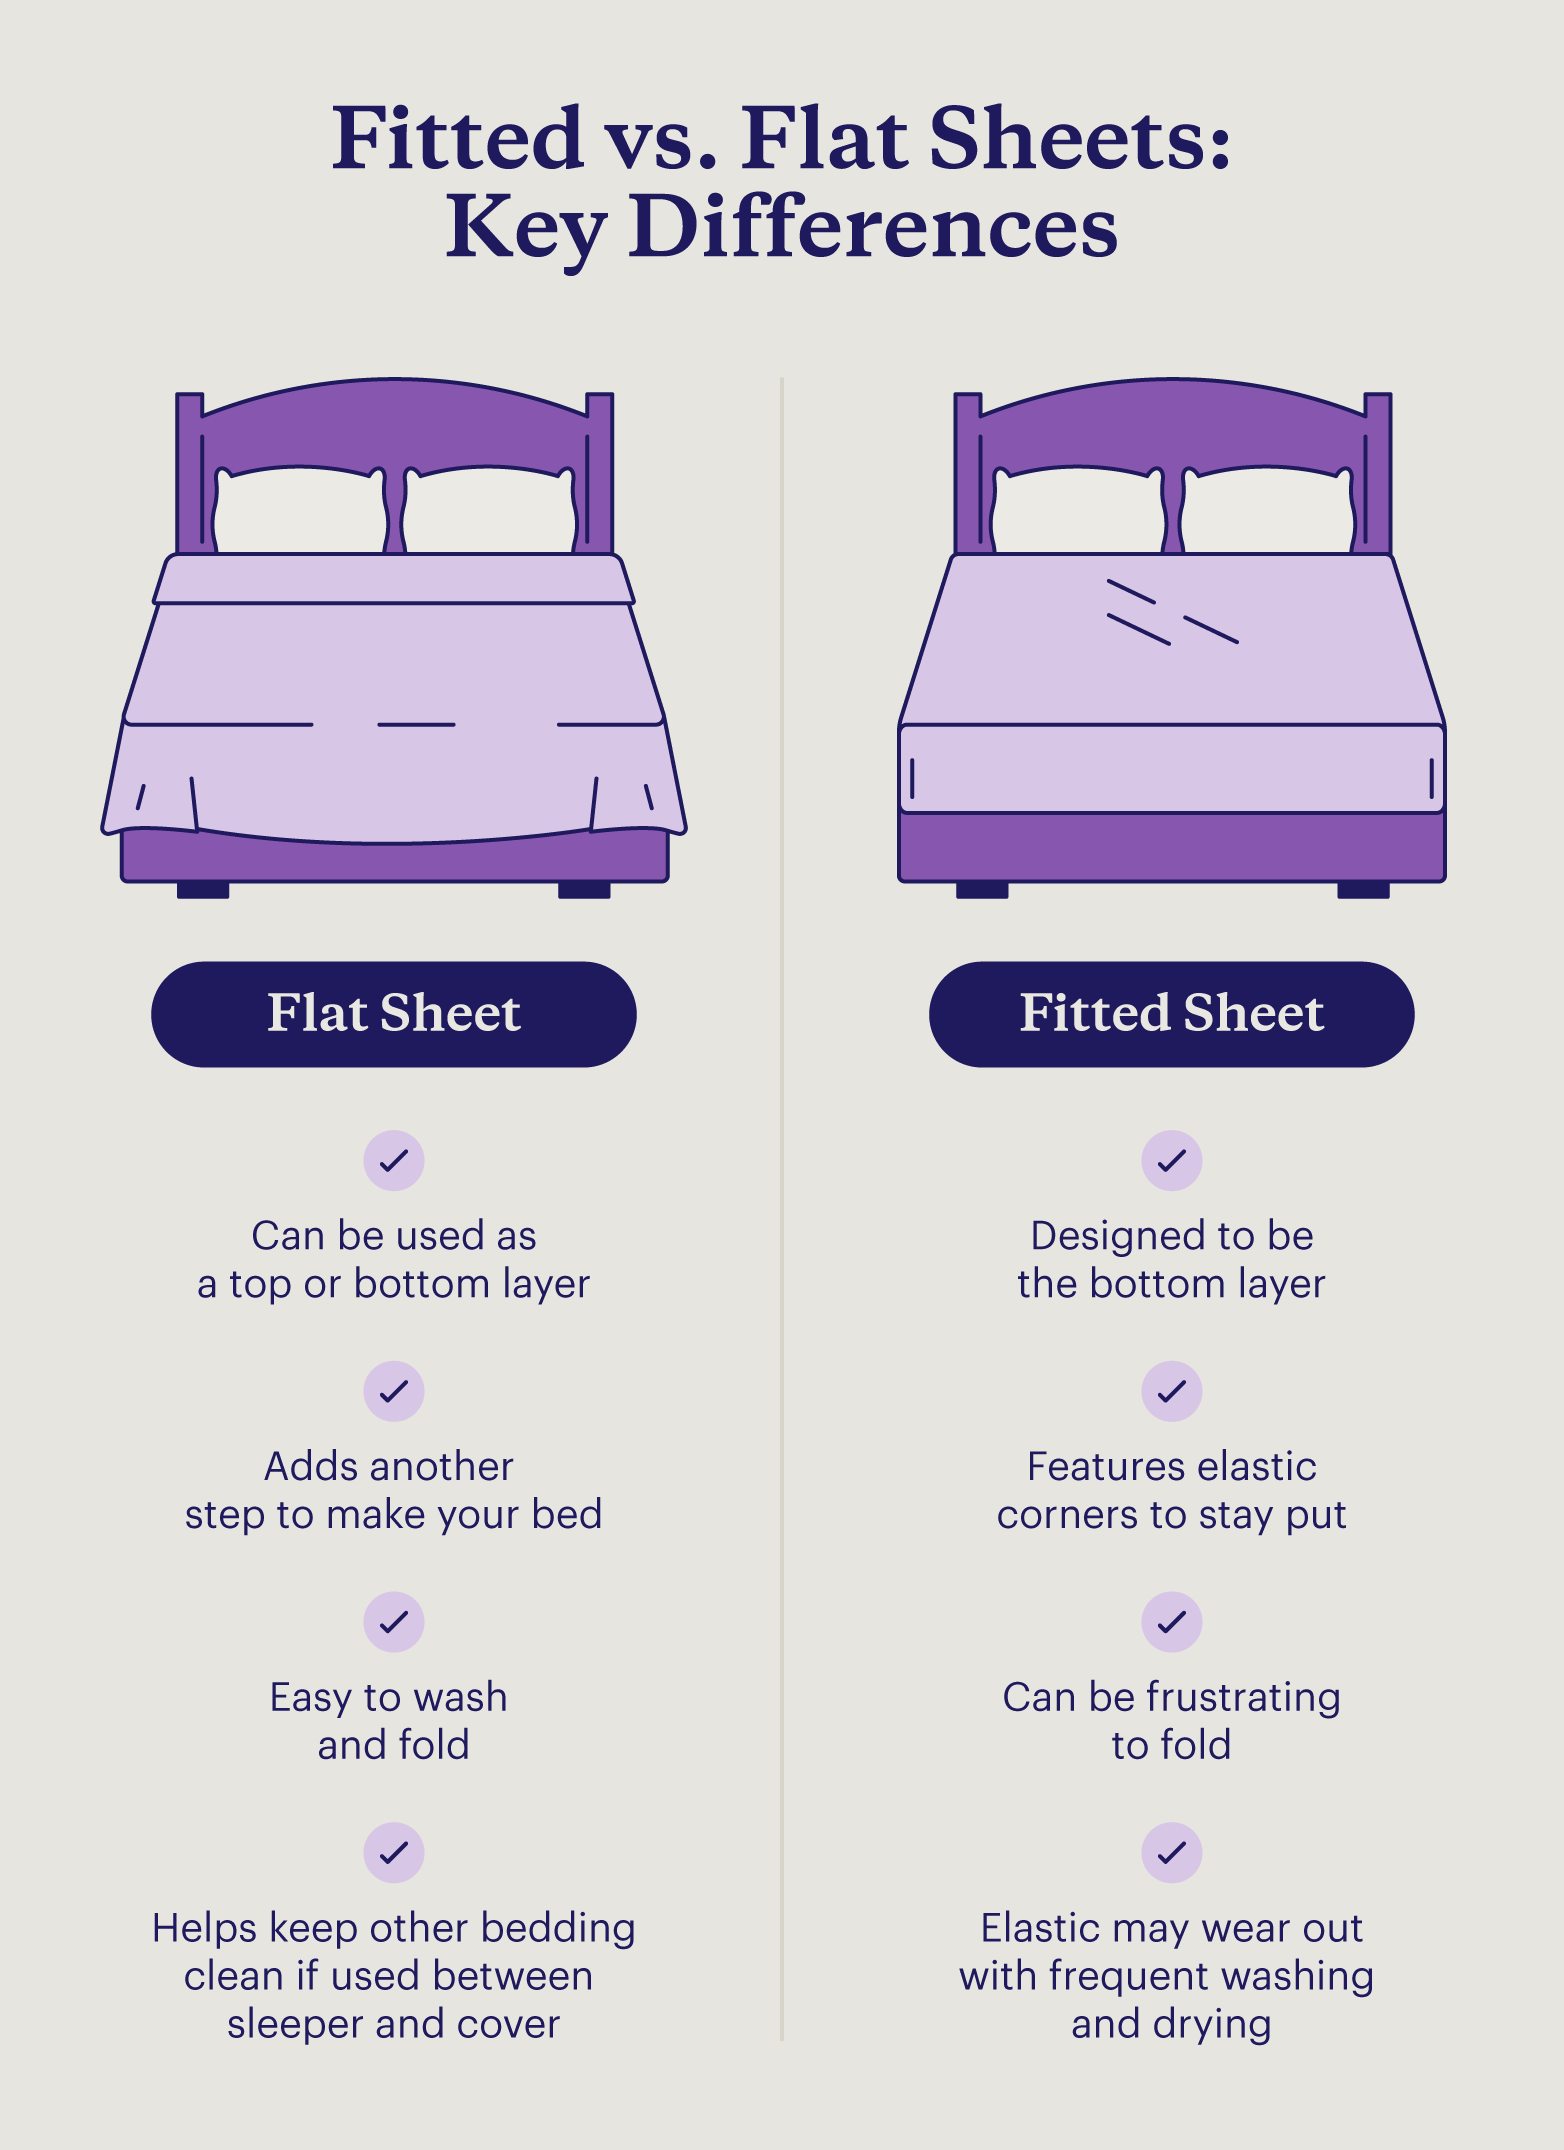 Graphic describing the key differences between fitted and flat sheets.